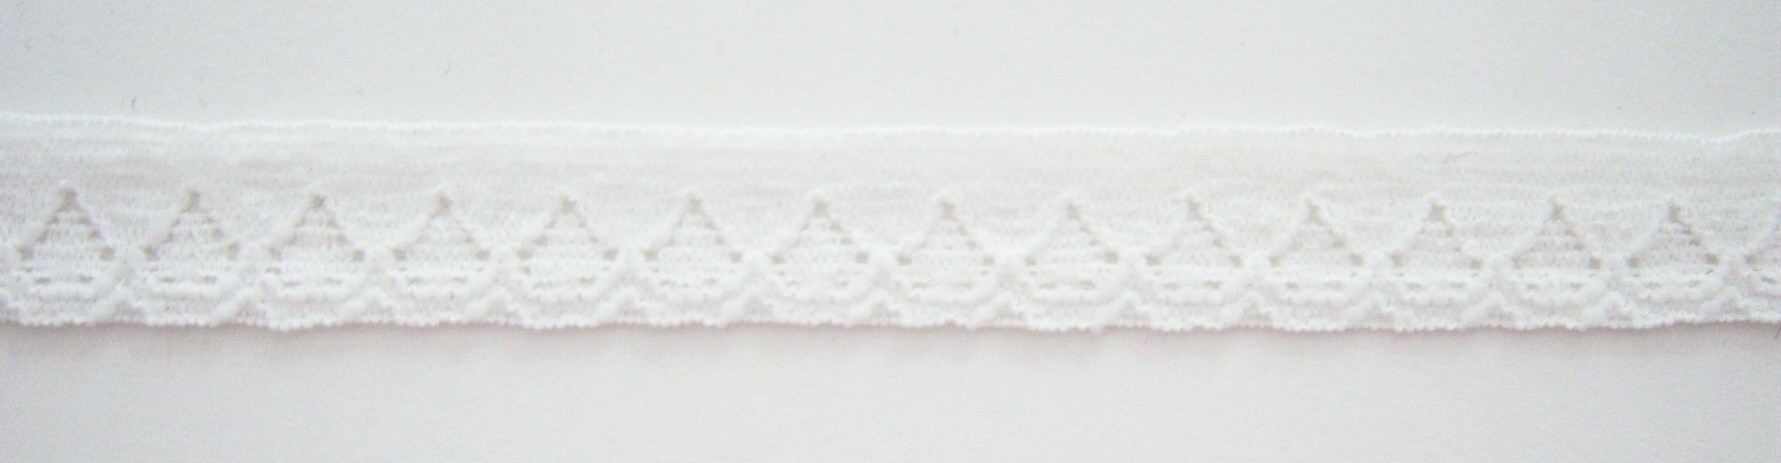 Star White 9/16" Stretch Lace